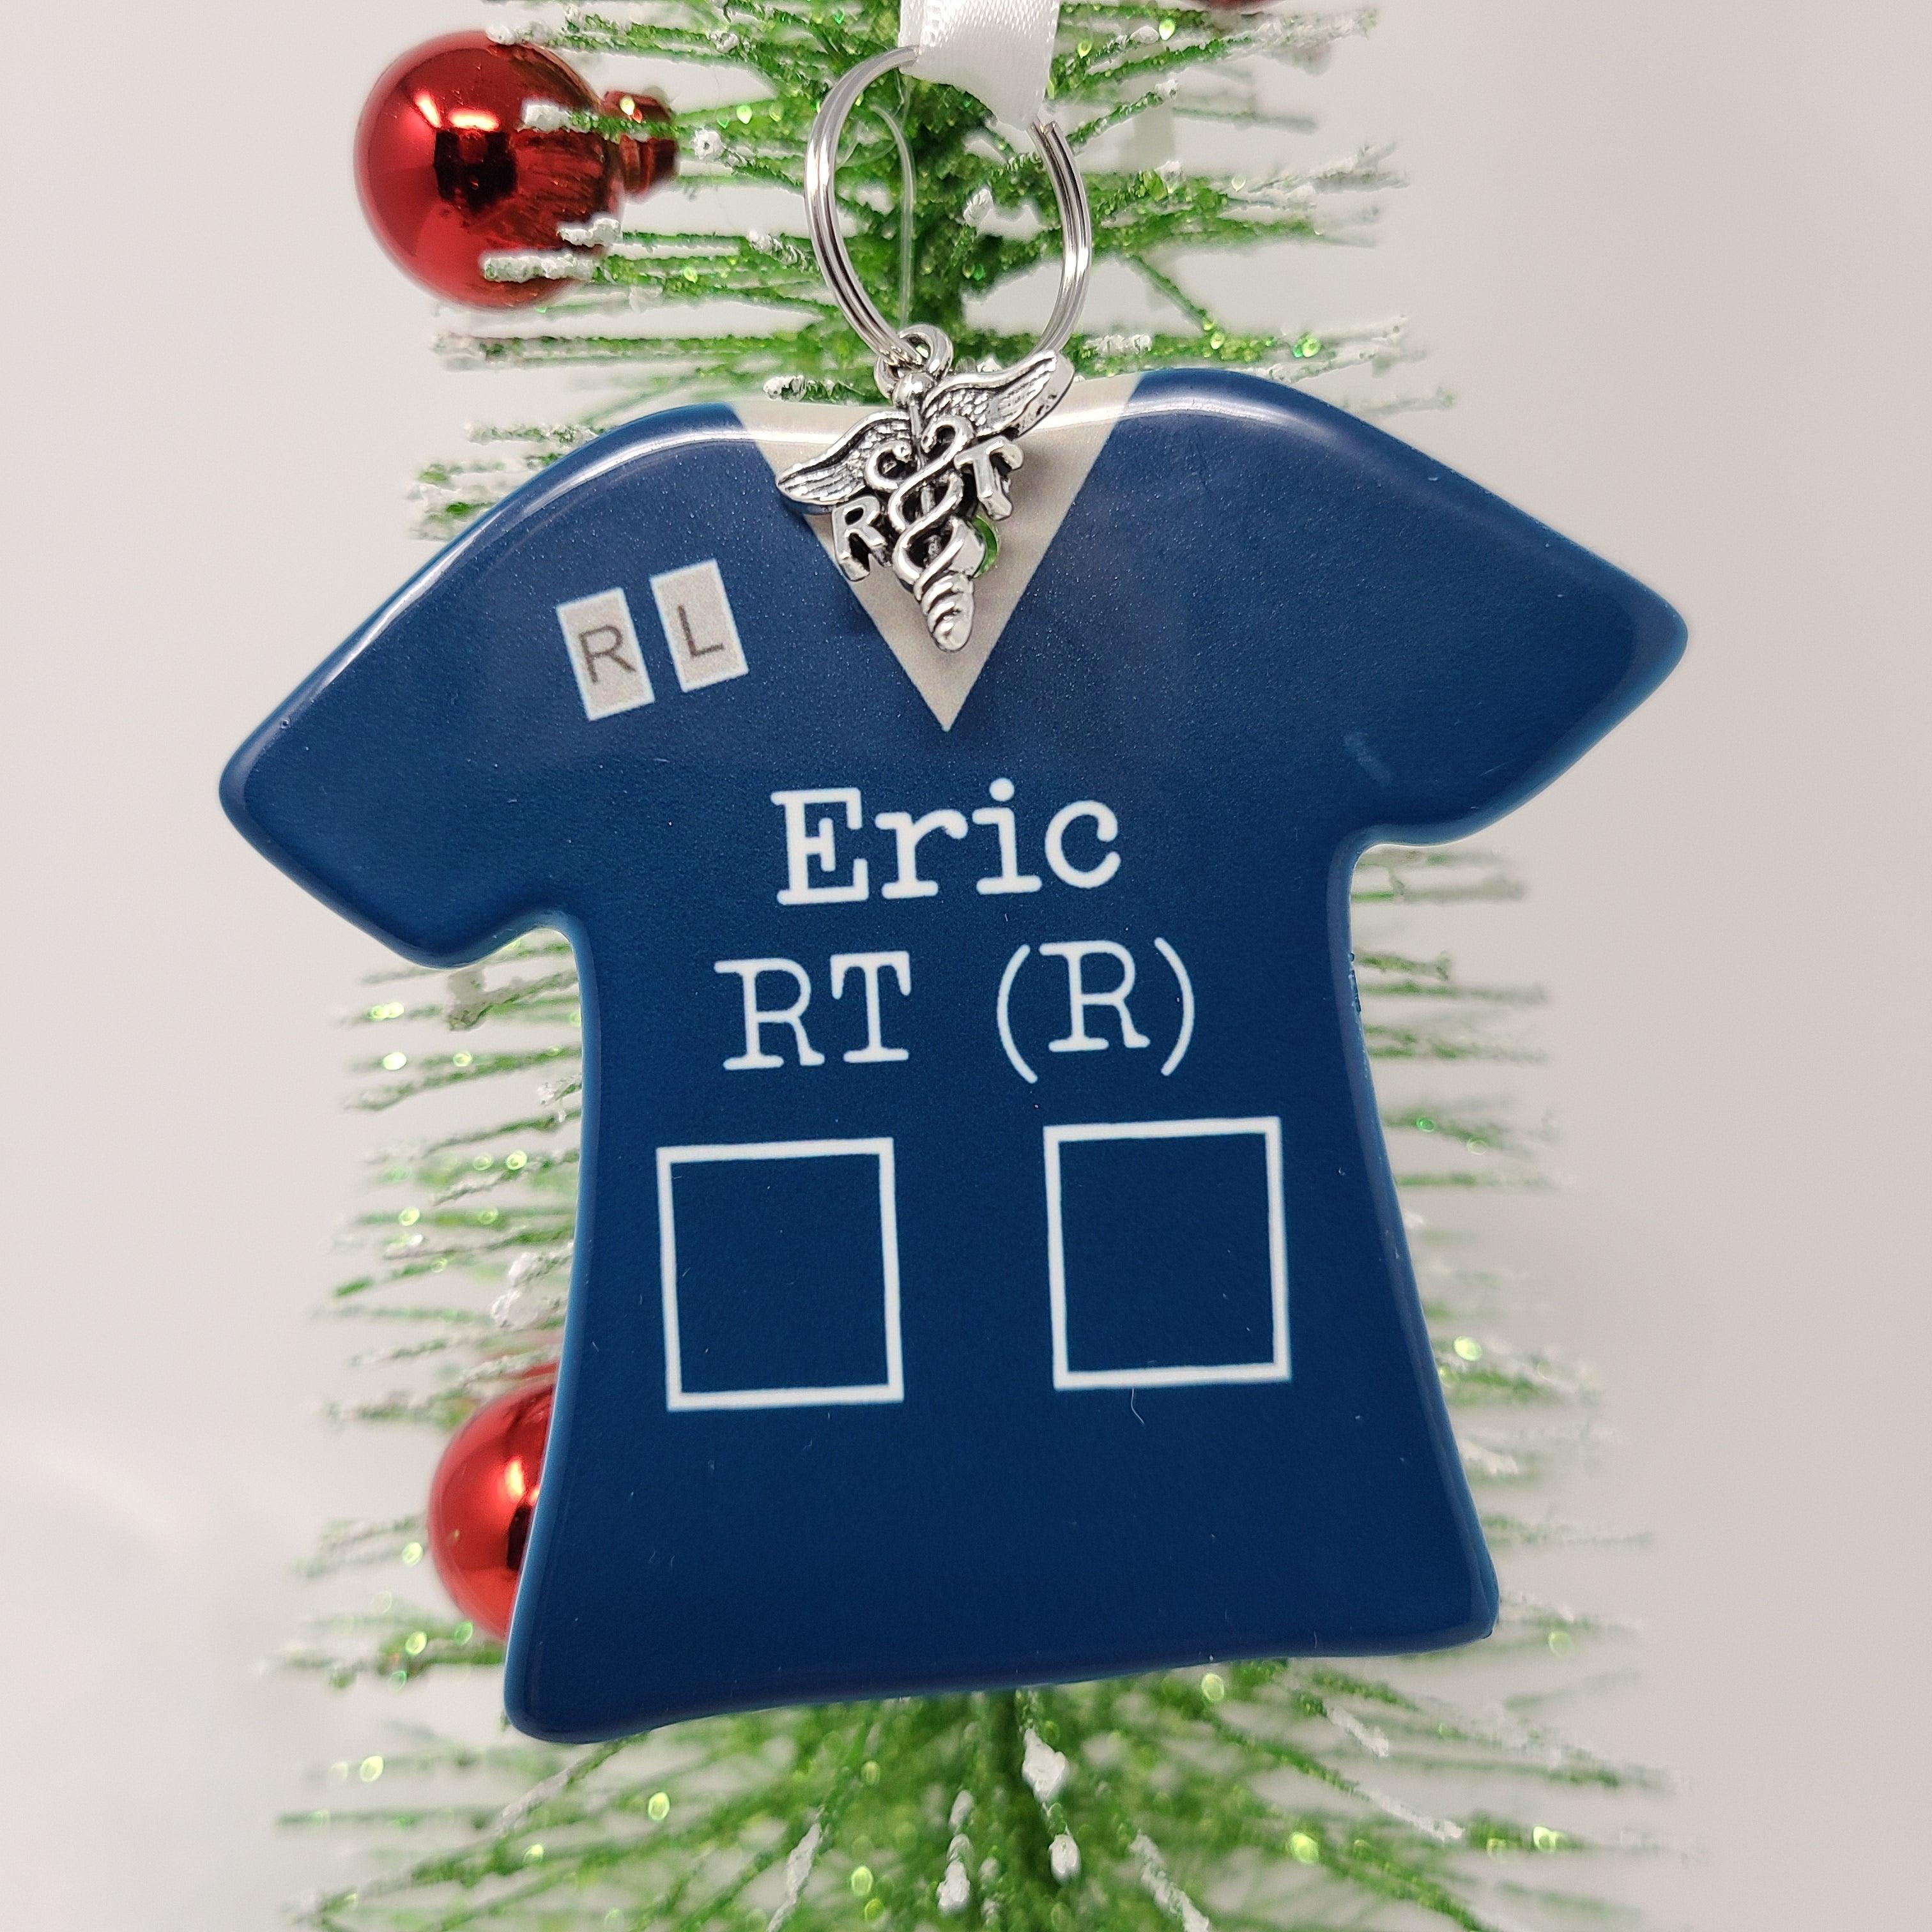 Personalized X-Ray tech ornament, Radiology technologist ornament, RT, Scrub top ornaments